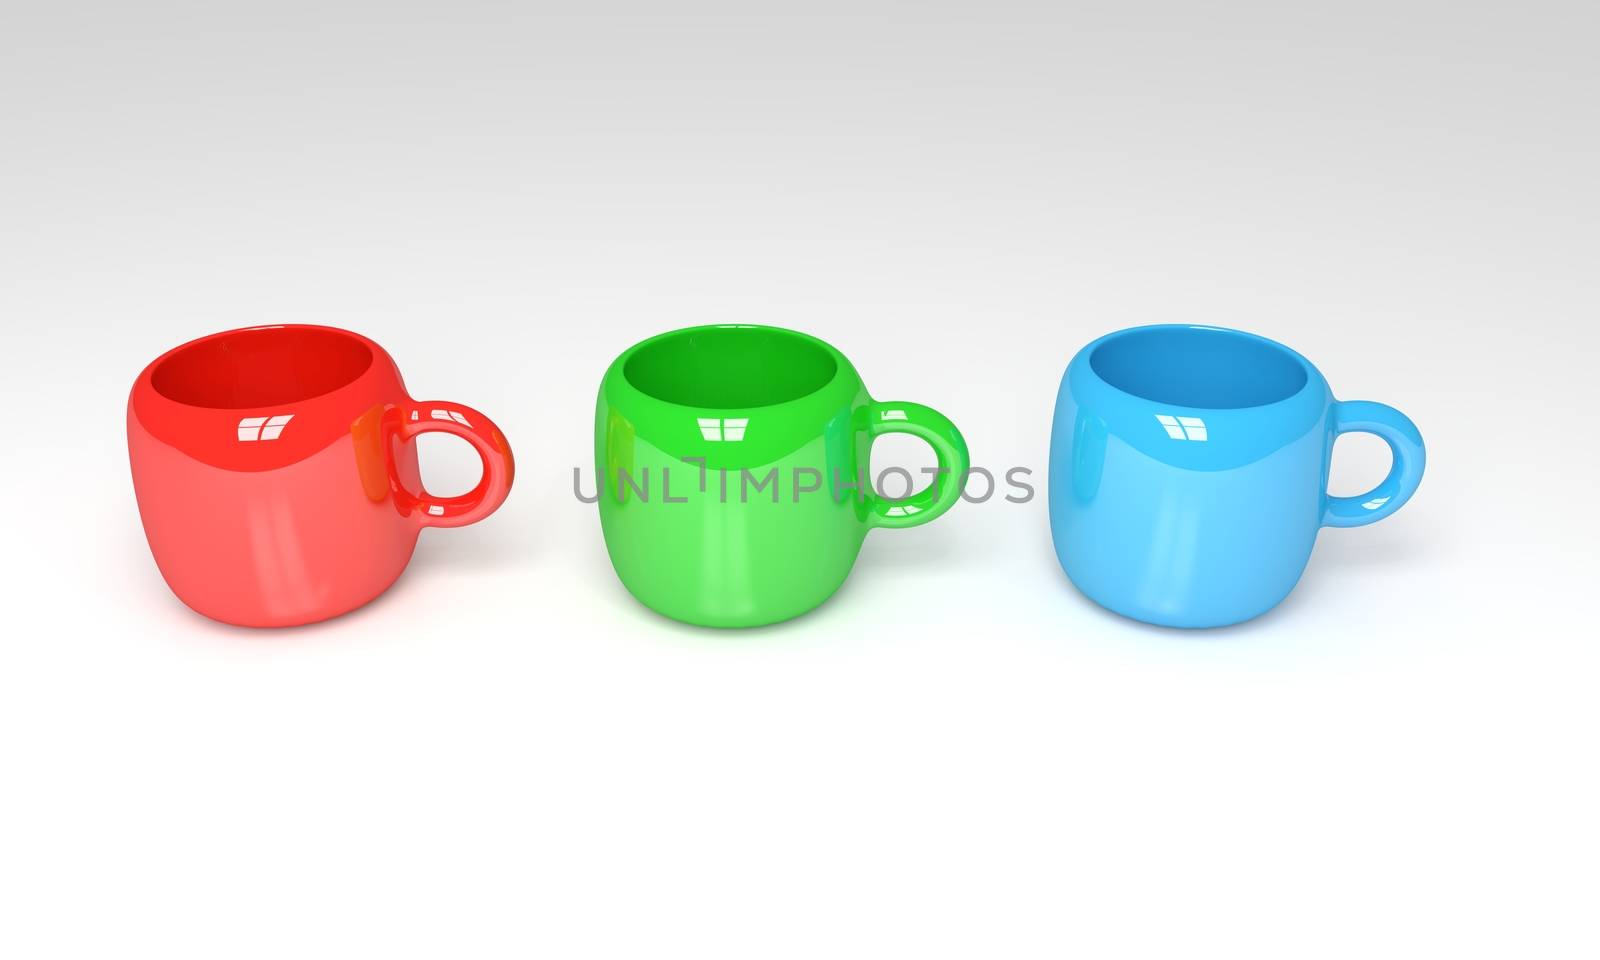 Illustration of three mugs in Red, Green and Blue together displaying the RGB color model